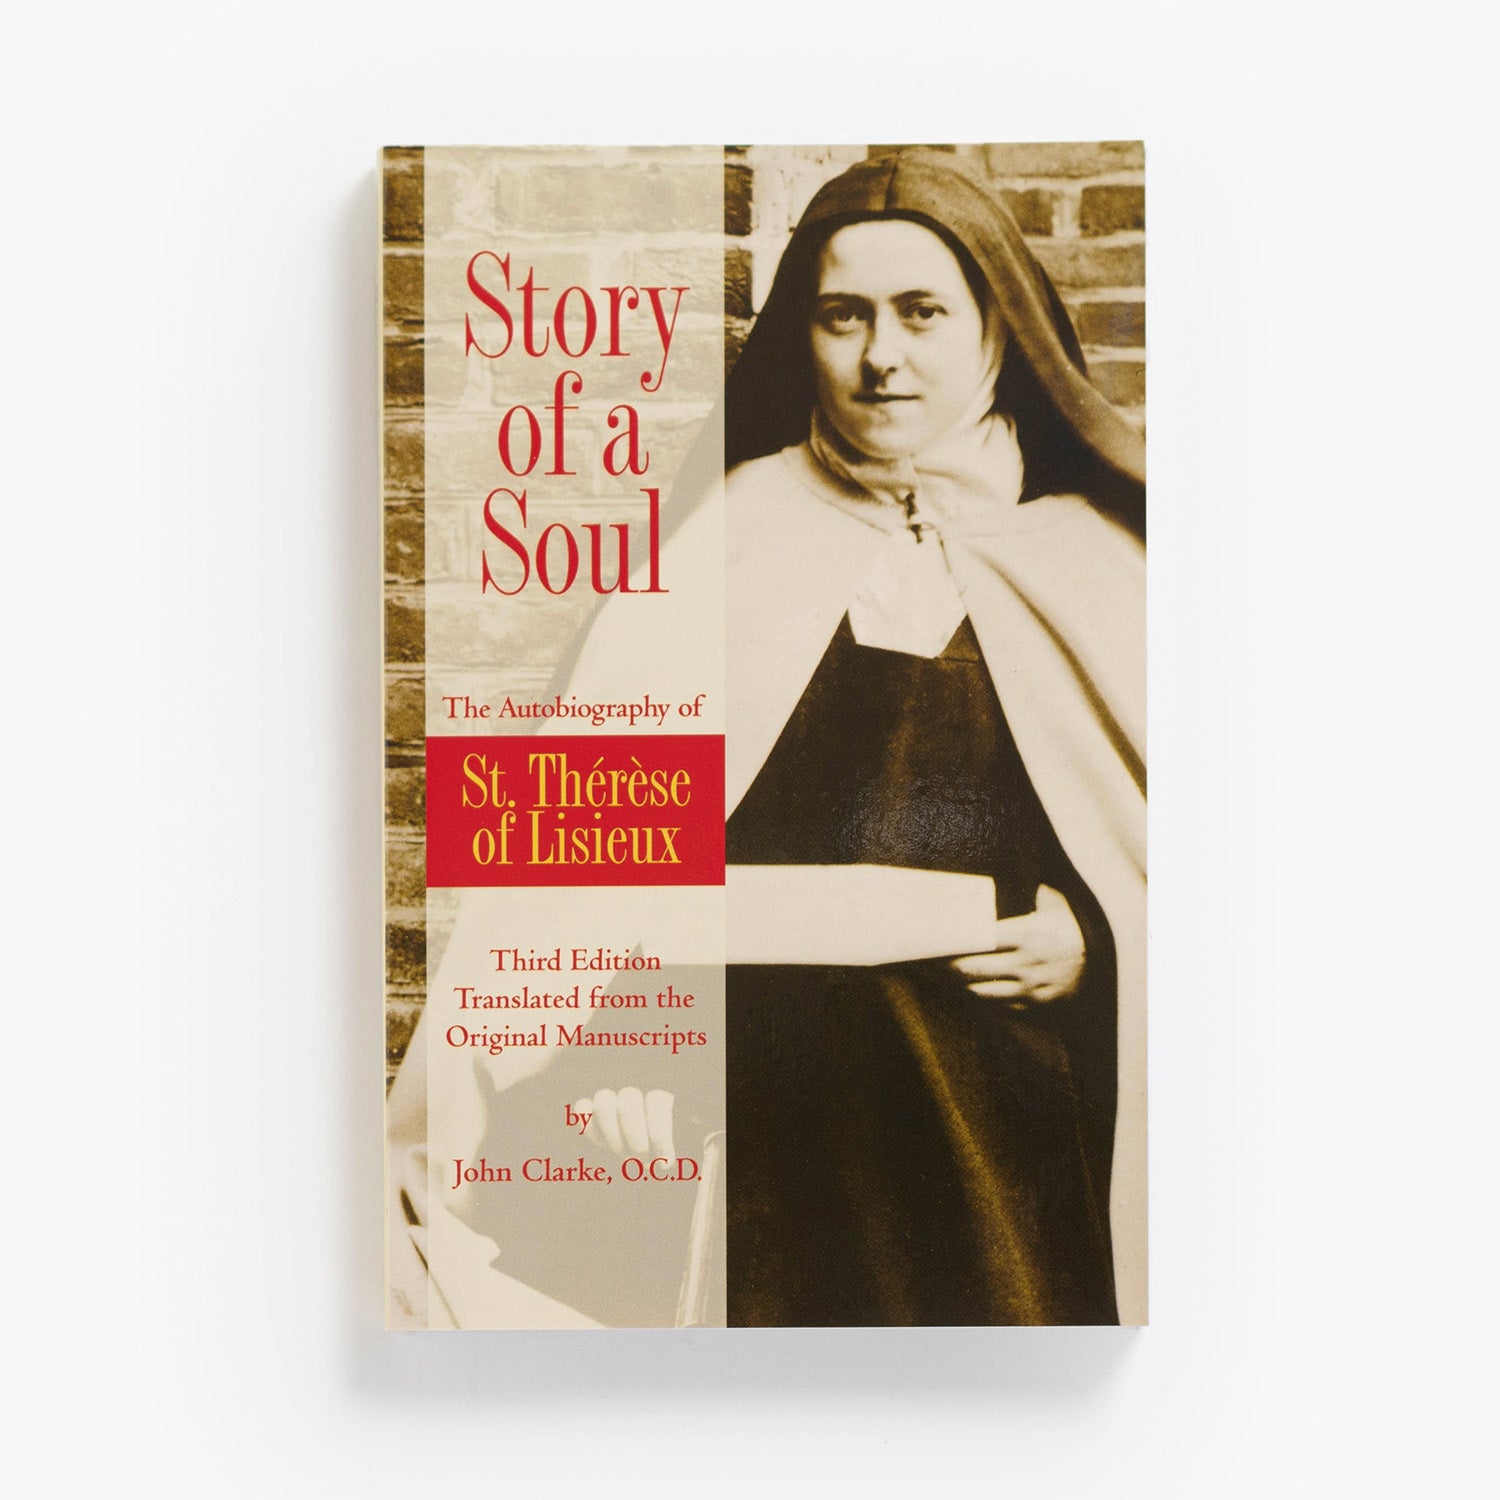 Story of a Soul: The Autobiography of St. Thérèse of Lisieux (the Little Flower)